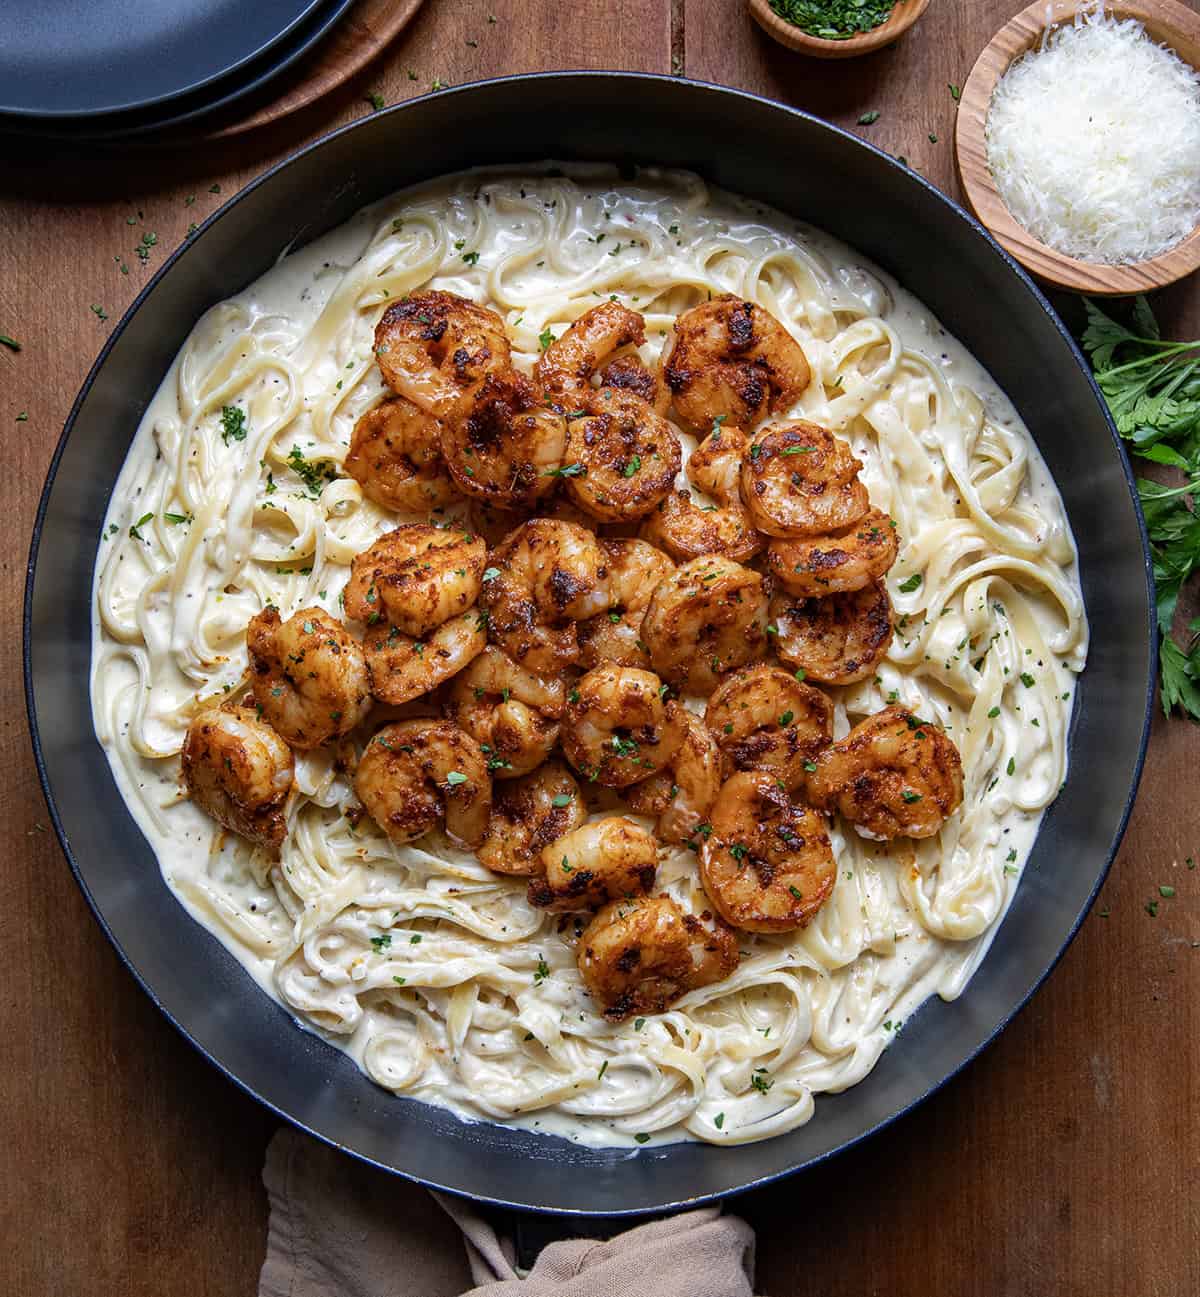 Skillet of Shrimp Alfredo on a wooden table from overhead.